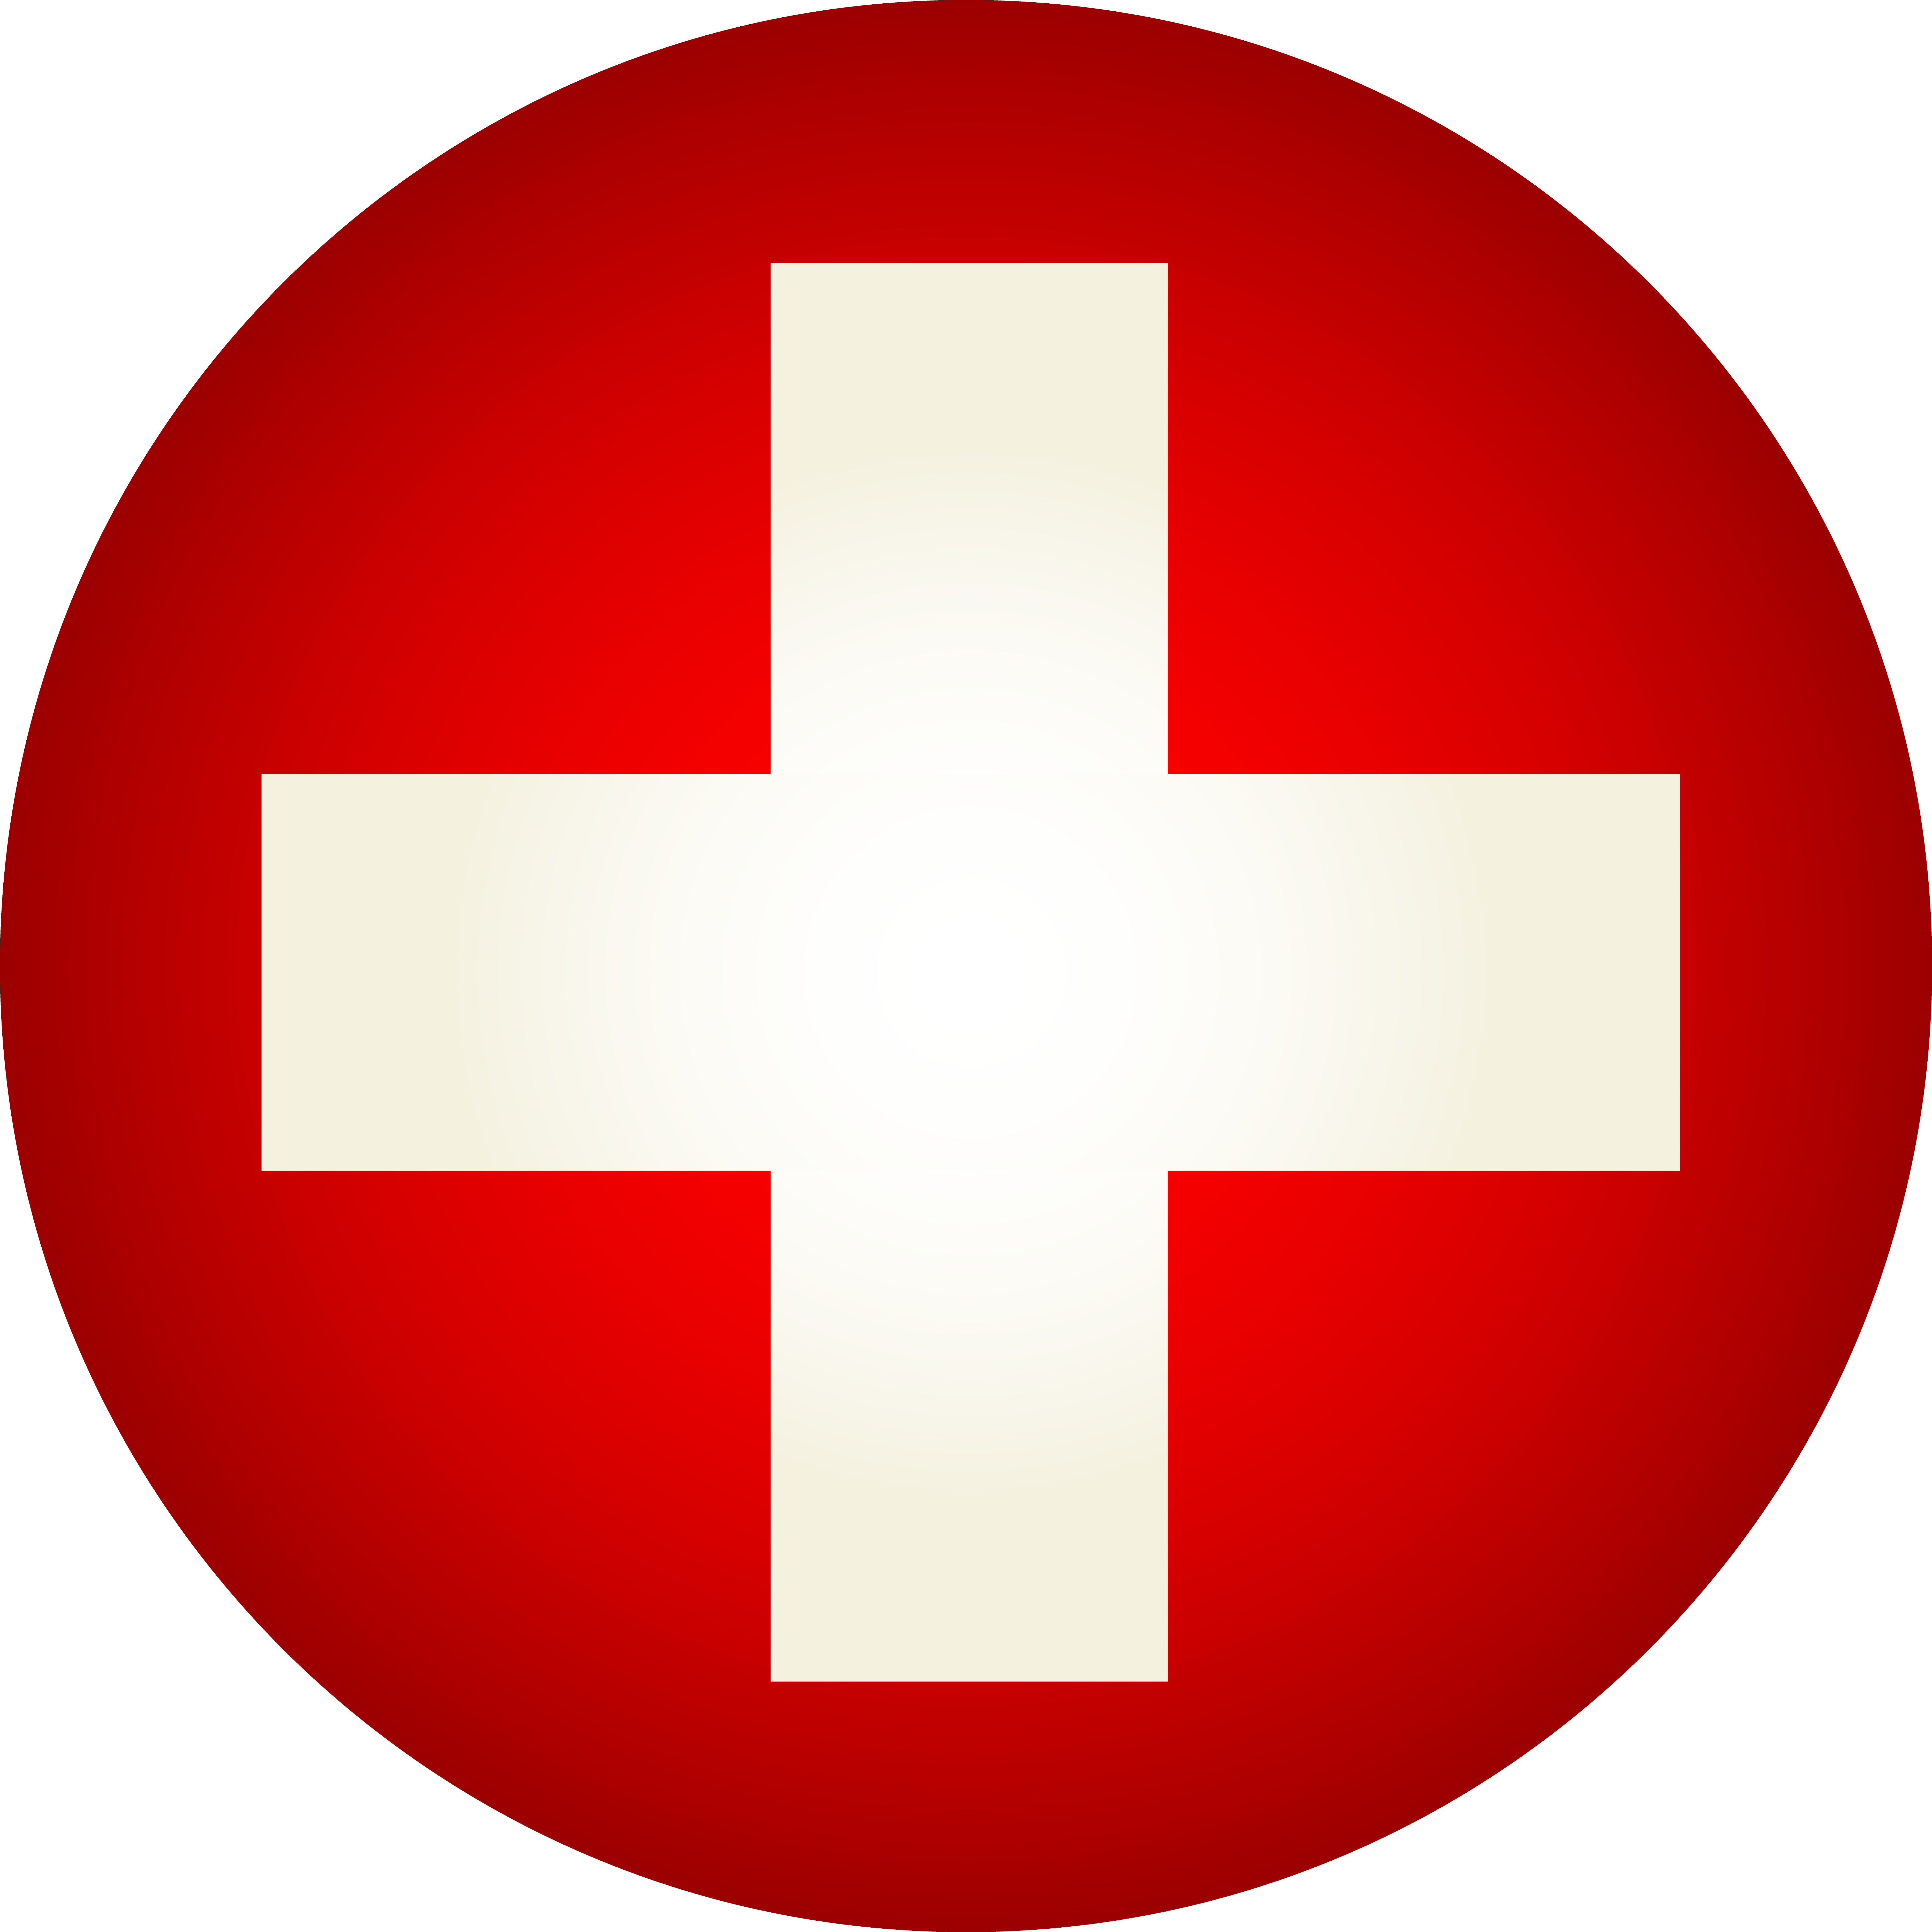 Red Medical Cross Logo - Red And White Medical cross Logo free image